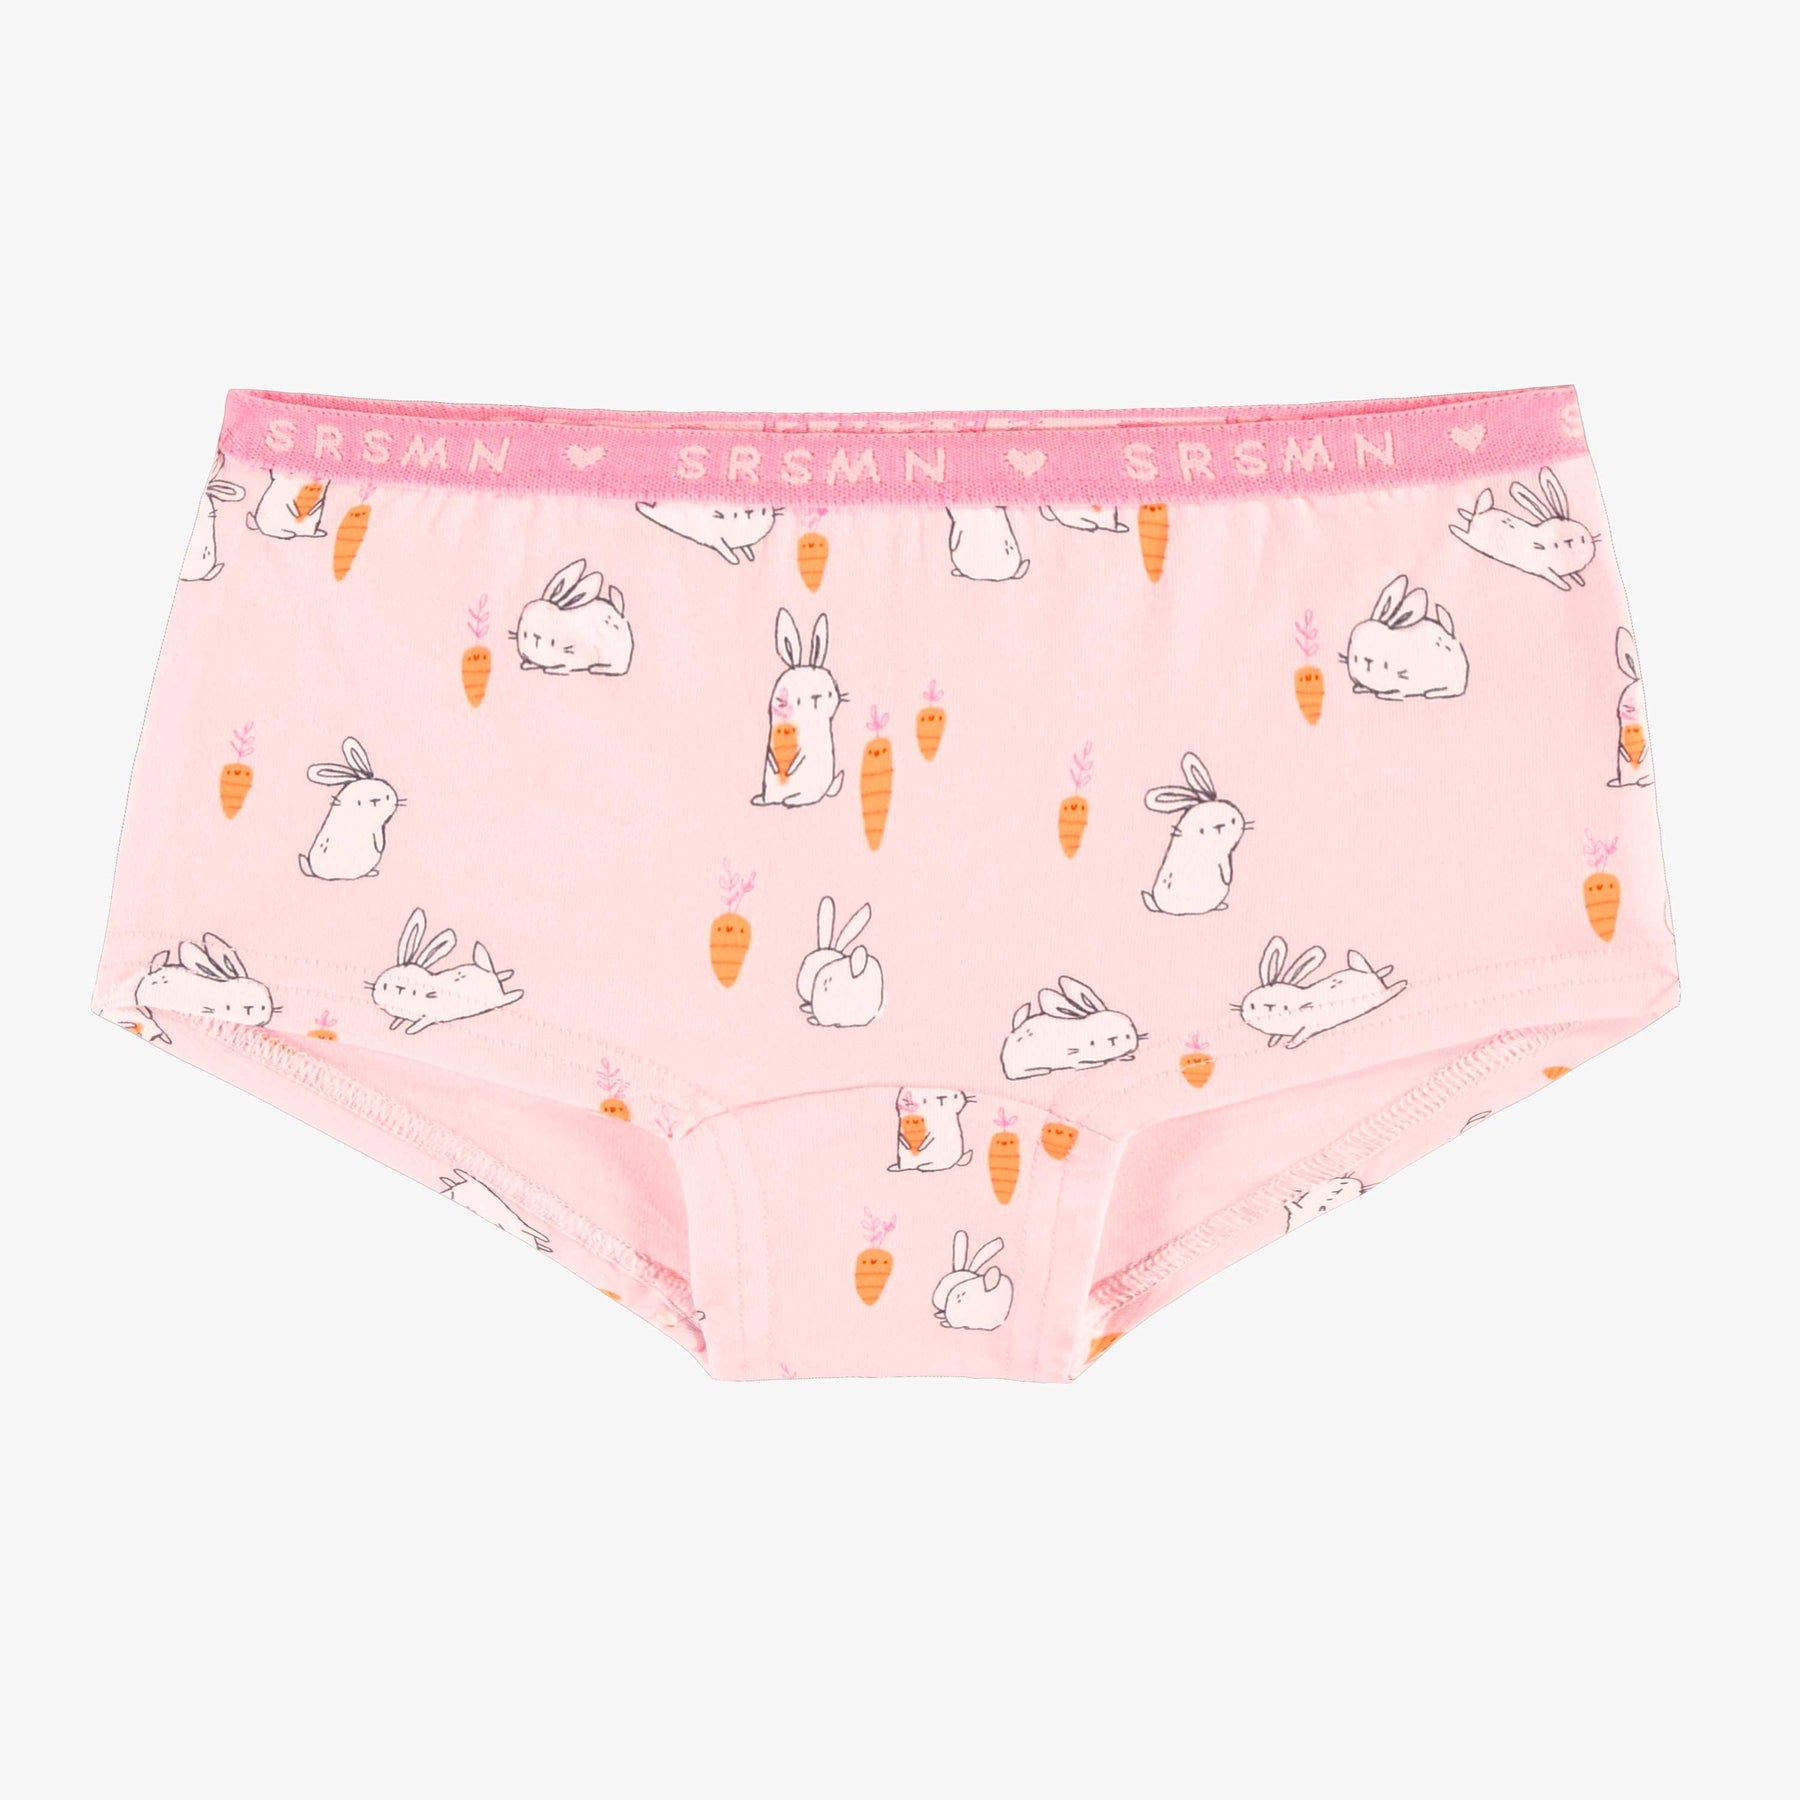 PINK BOYCUT PANTIES WITH BUNNIES AND CHICKENS PRINT STRETCH JERSEY, CHILD